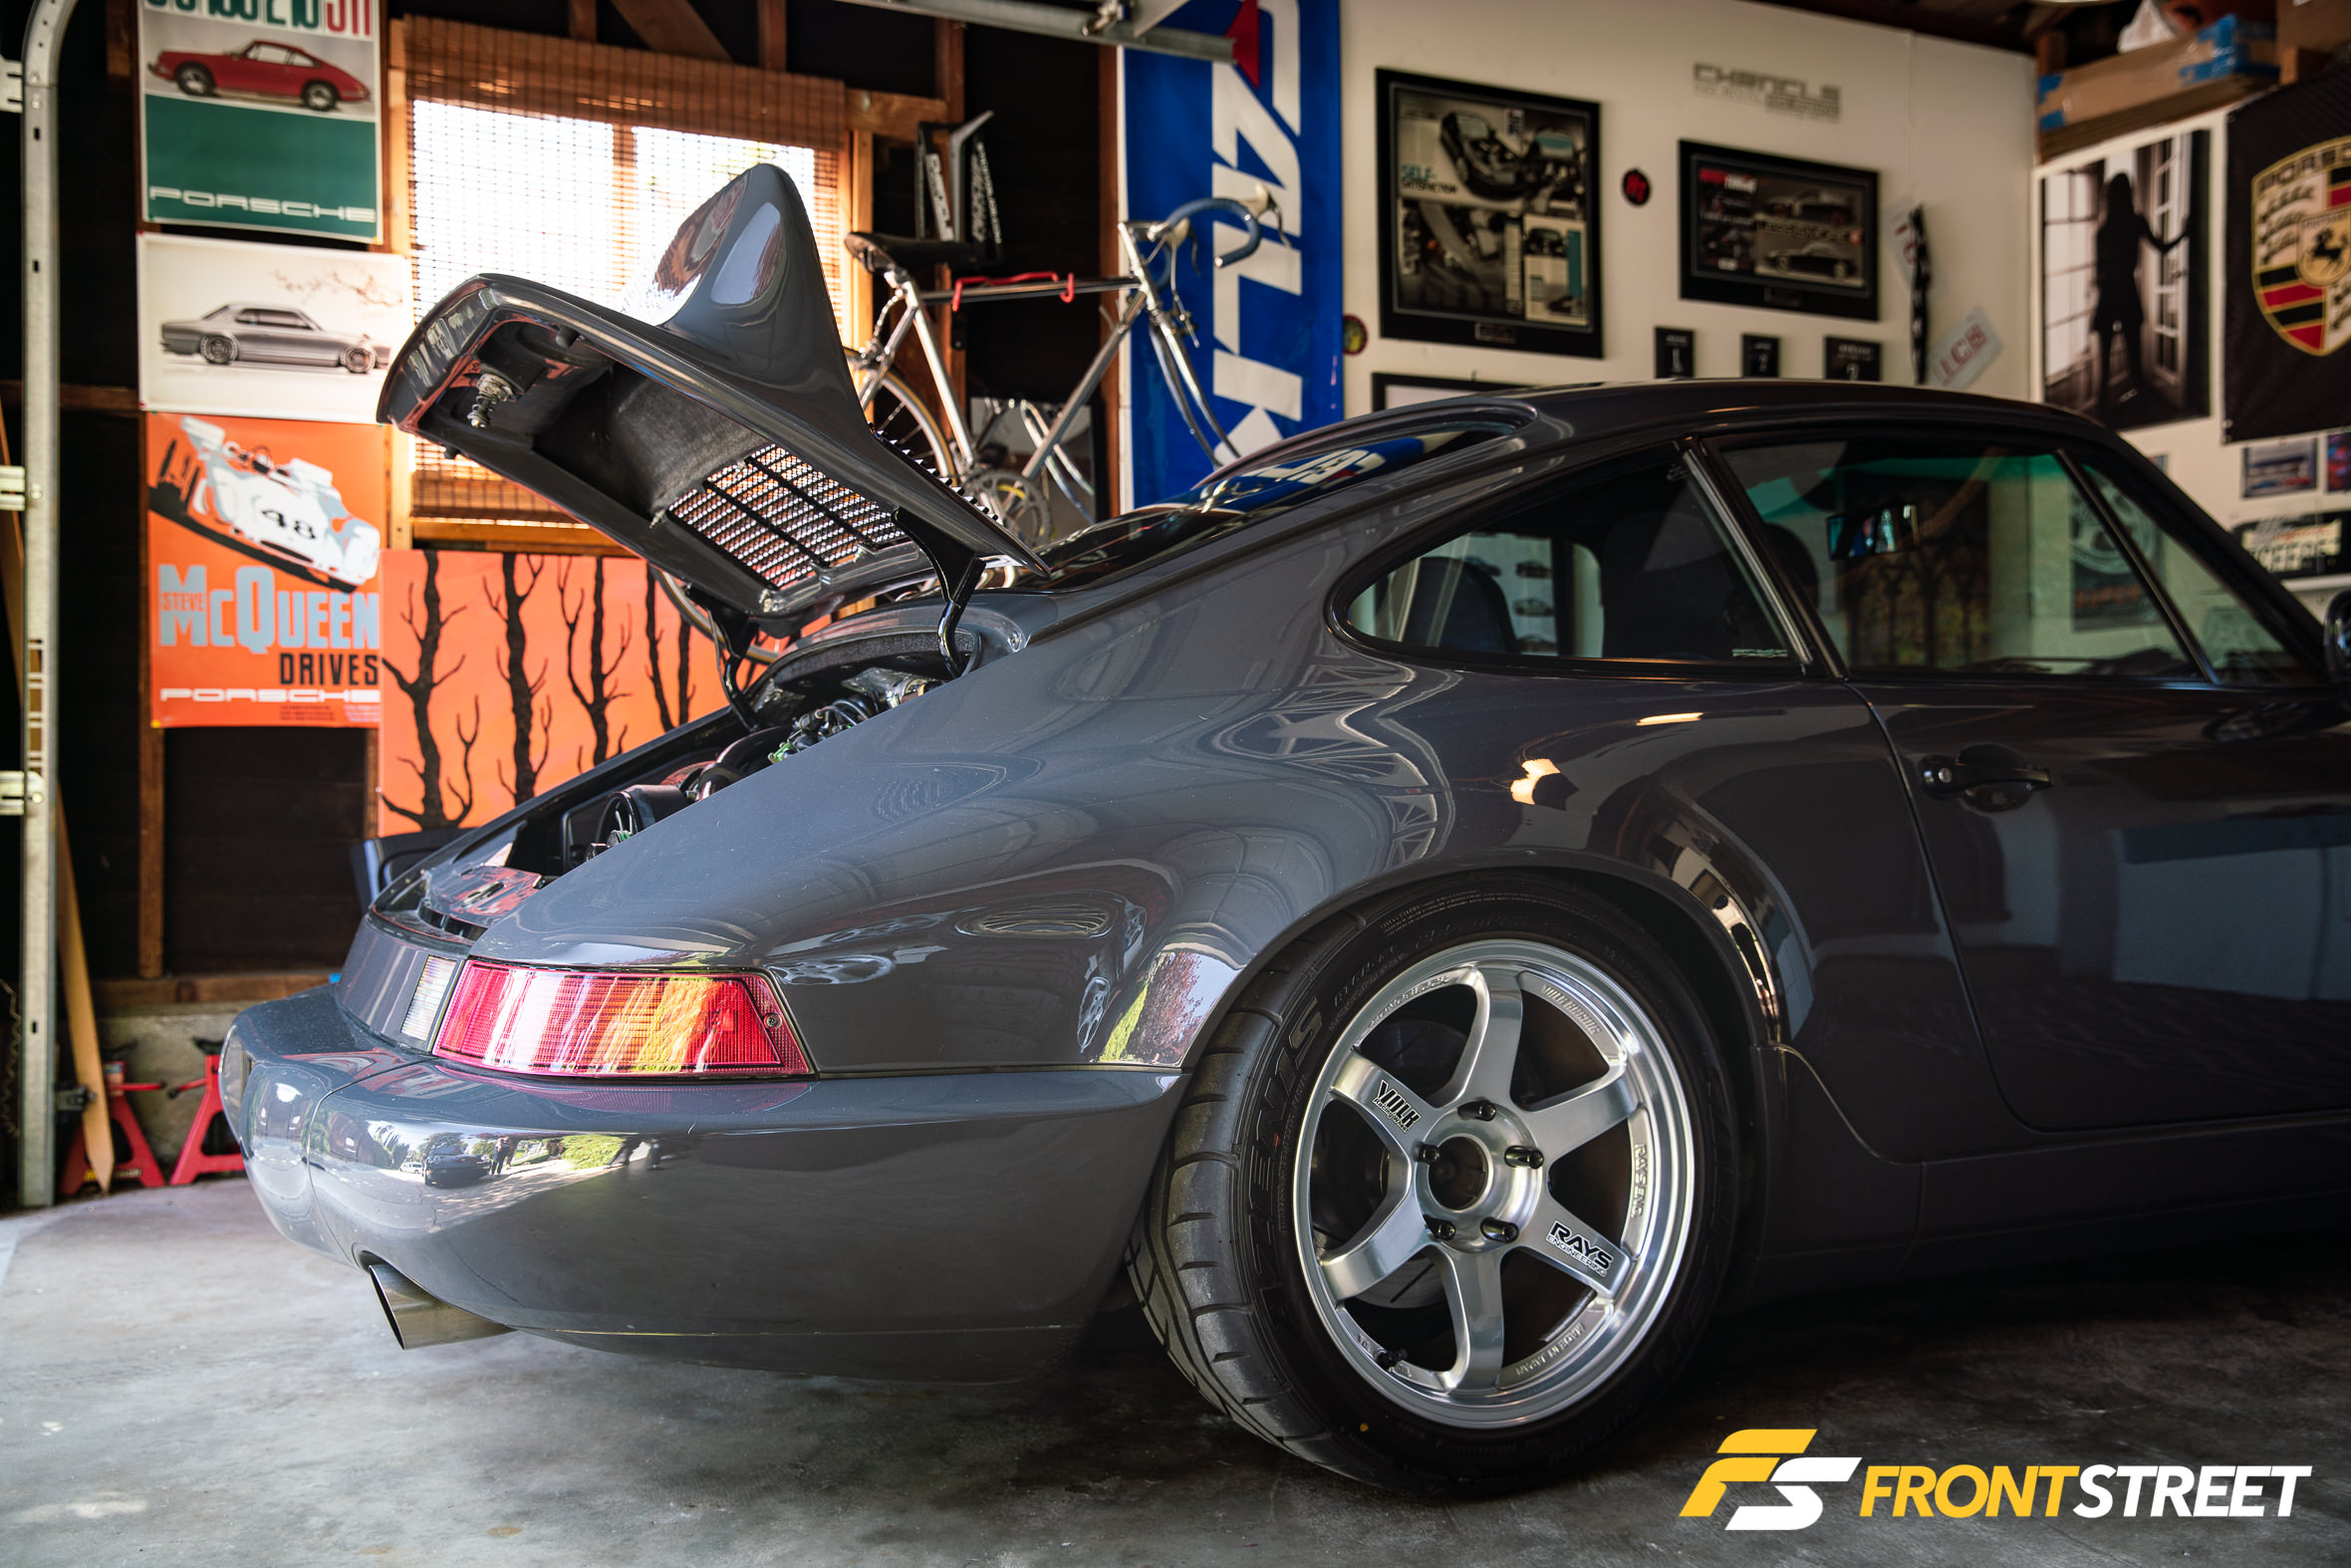 All Great Things Come To Those Who Wait: Jared Aguila's 1989 Carrera 4